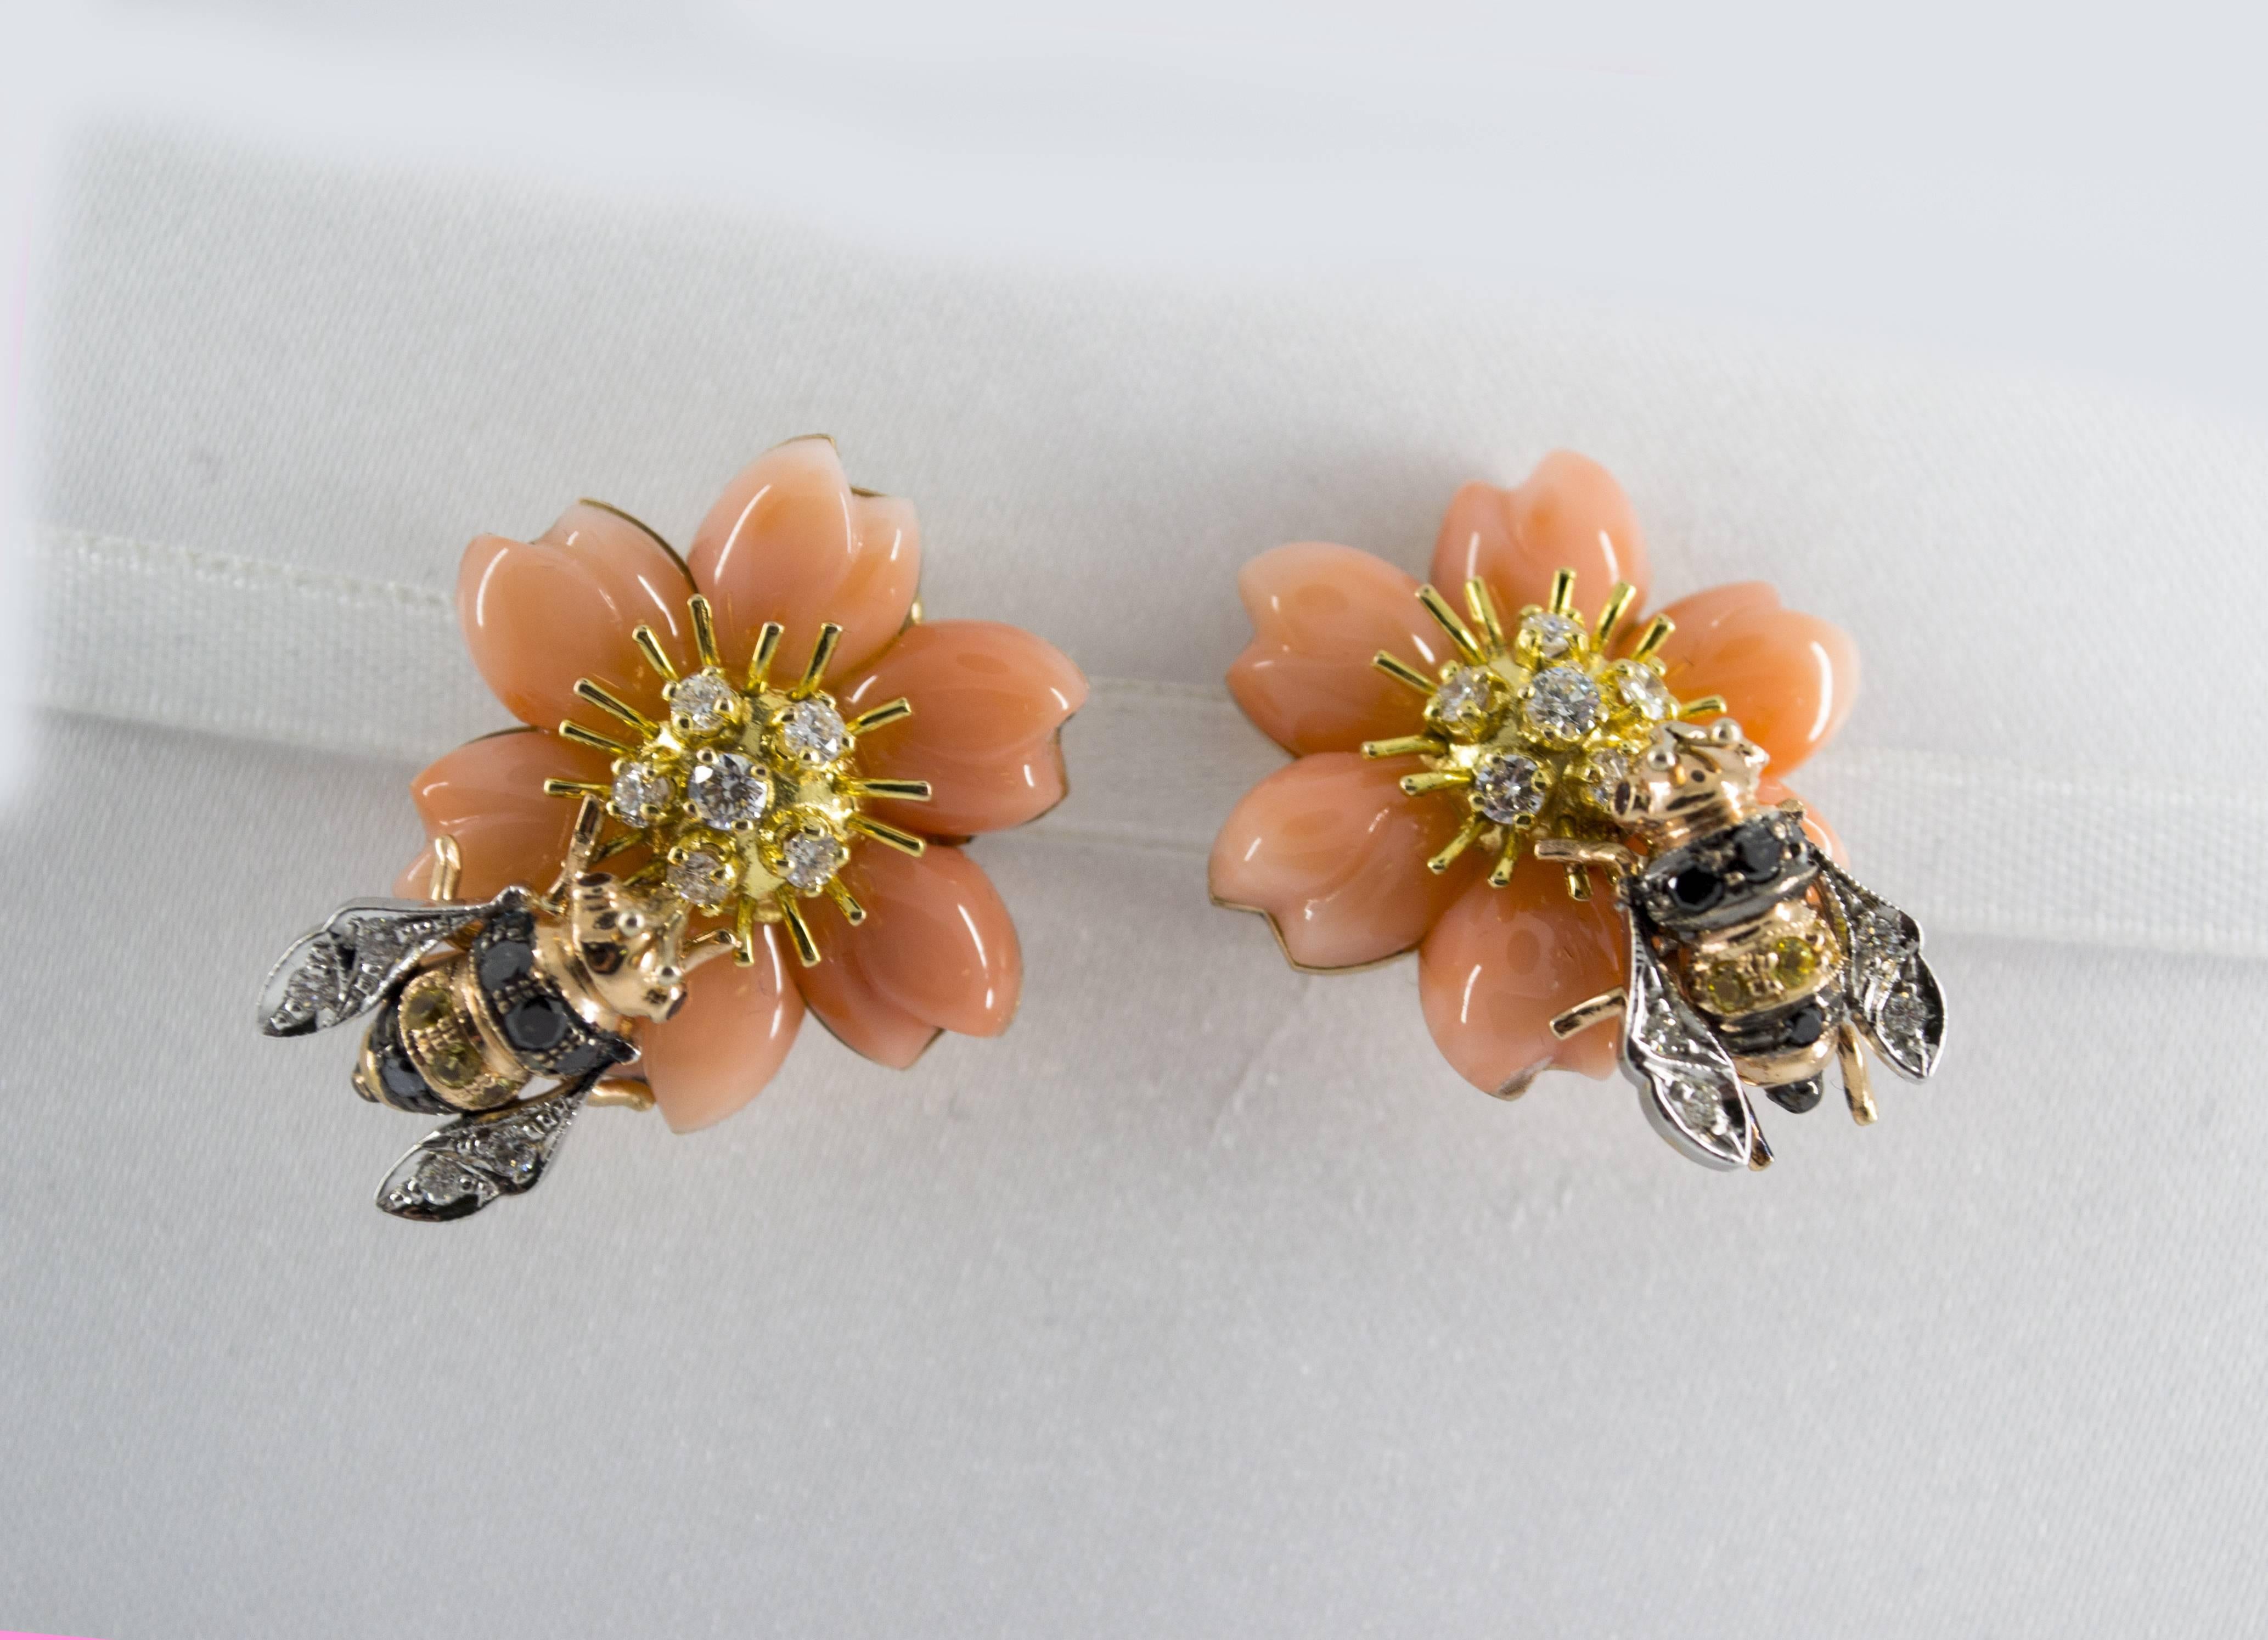 These Earrings are made of 14K Yellow Gold.
These Earrings have 1.10 Carats of White Diamonds.
These Earrings have 0.20 Carats of Yellow Sapphires.
These Earrings have Pink Coral.
All our Earrings have pins for pierced ears but we can change the